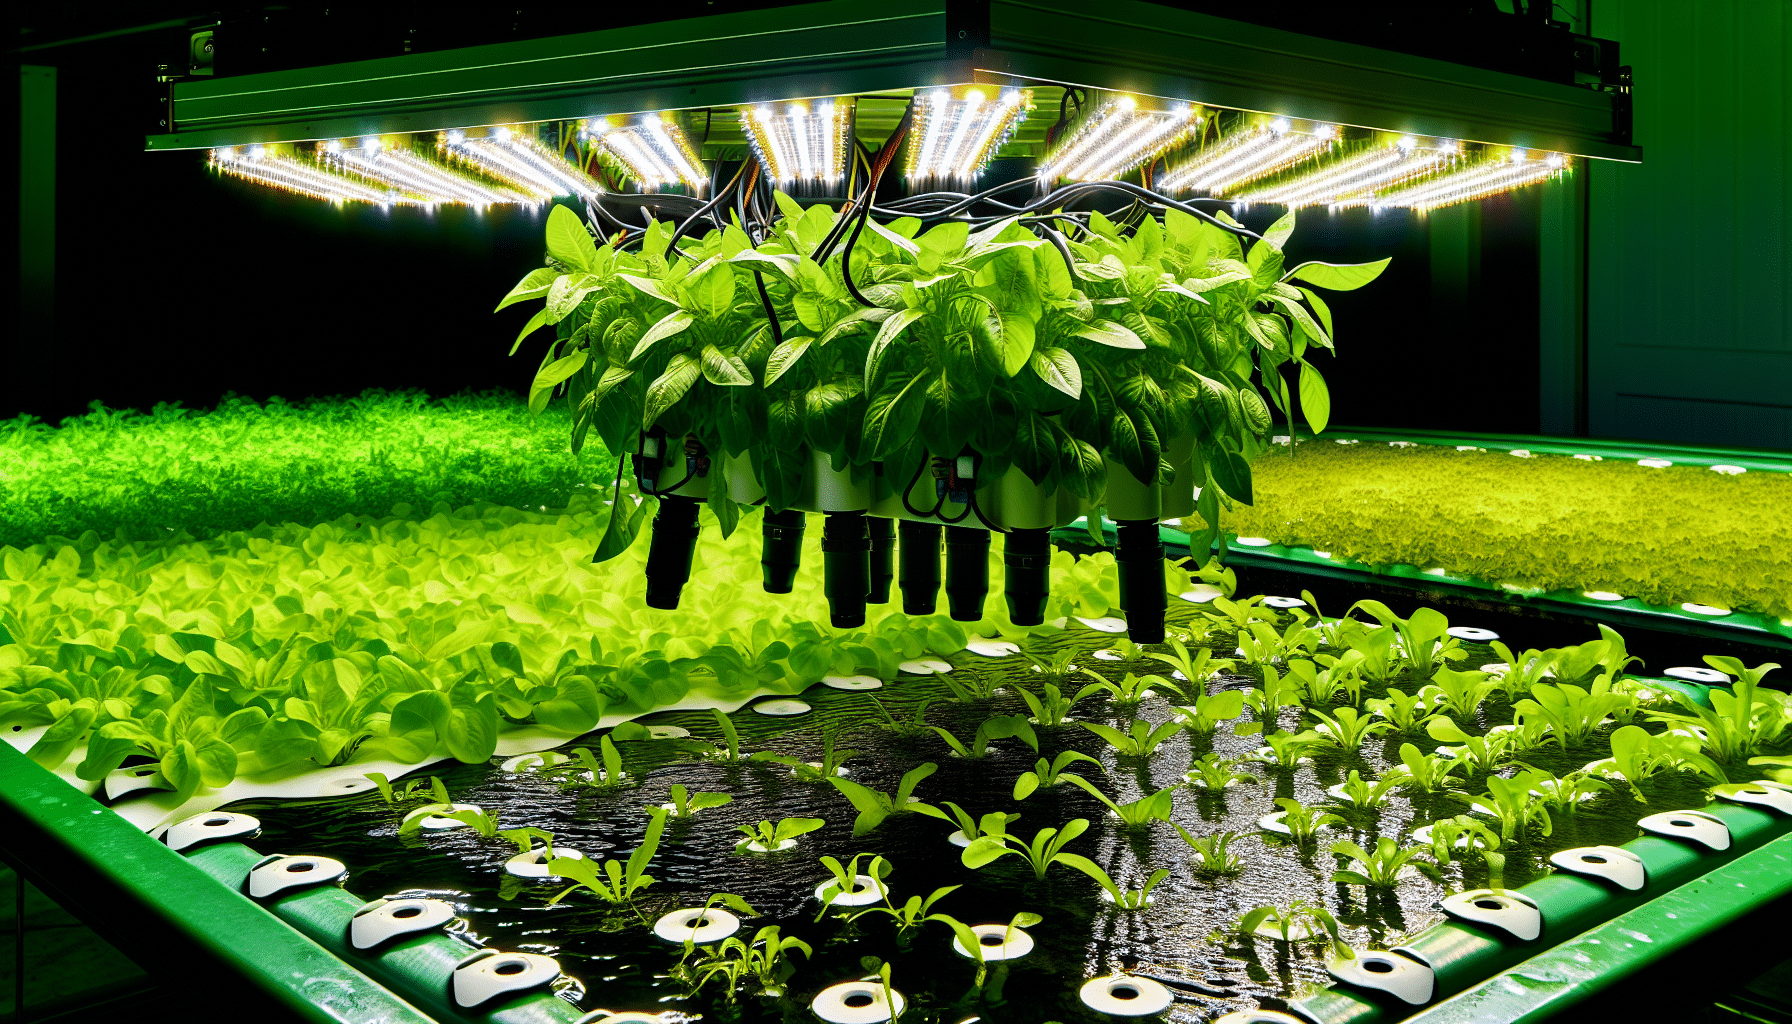 Hydroponic garden with high-intensity discharge lighting system